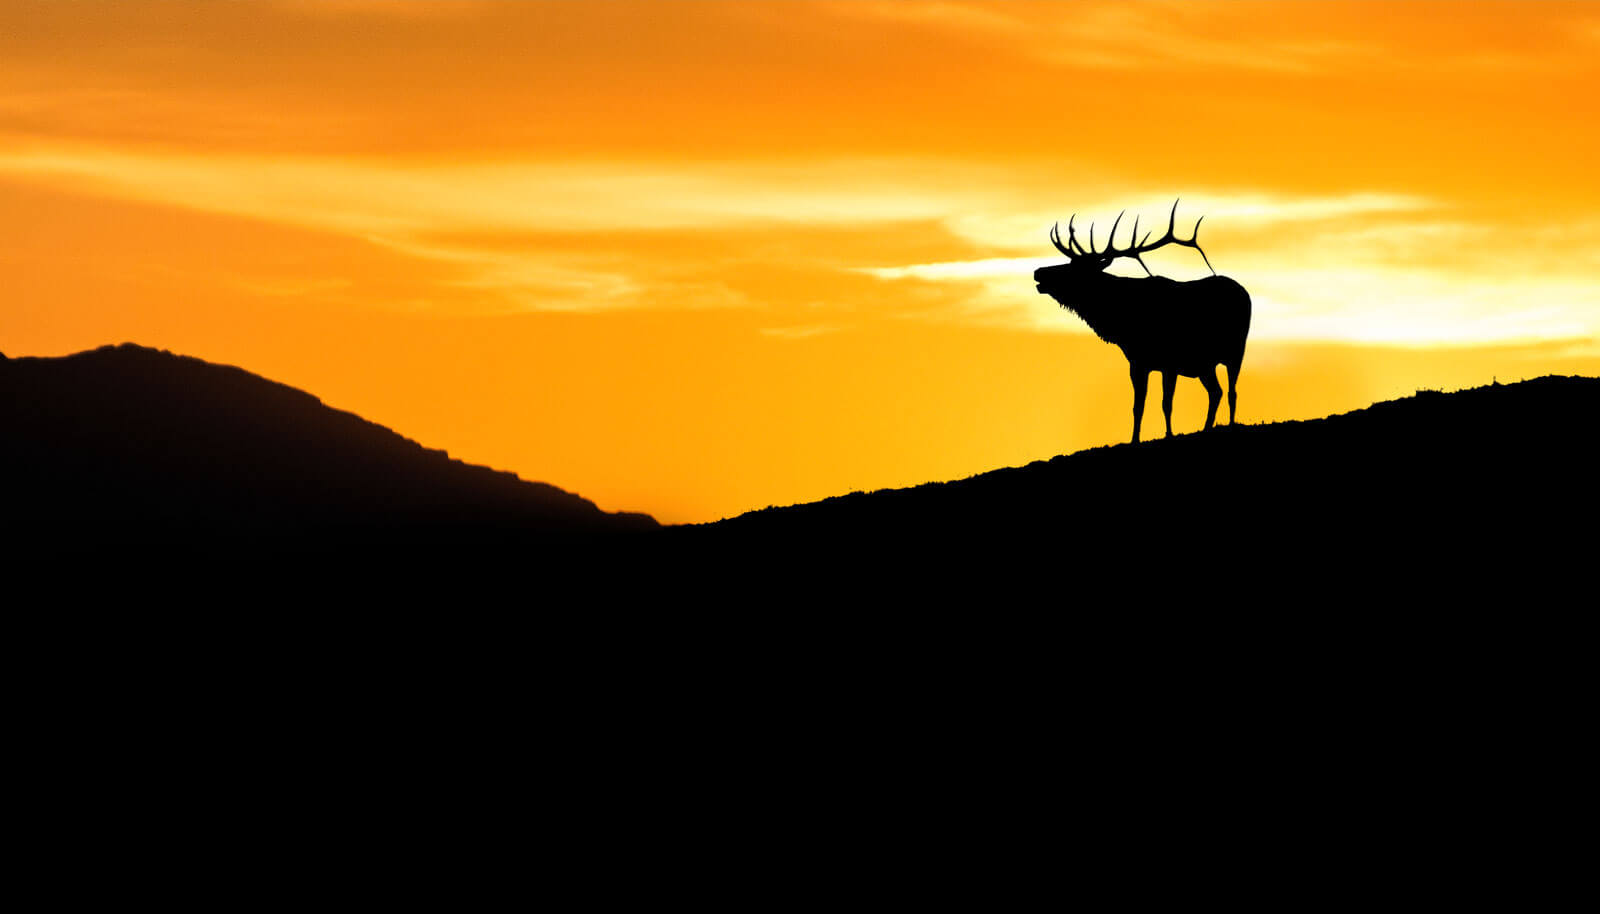 Silhouette of a deer in the mountains